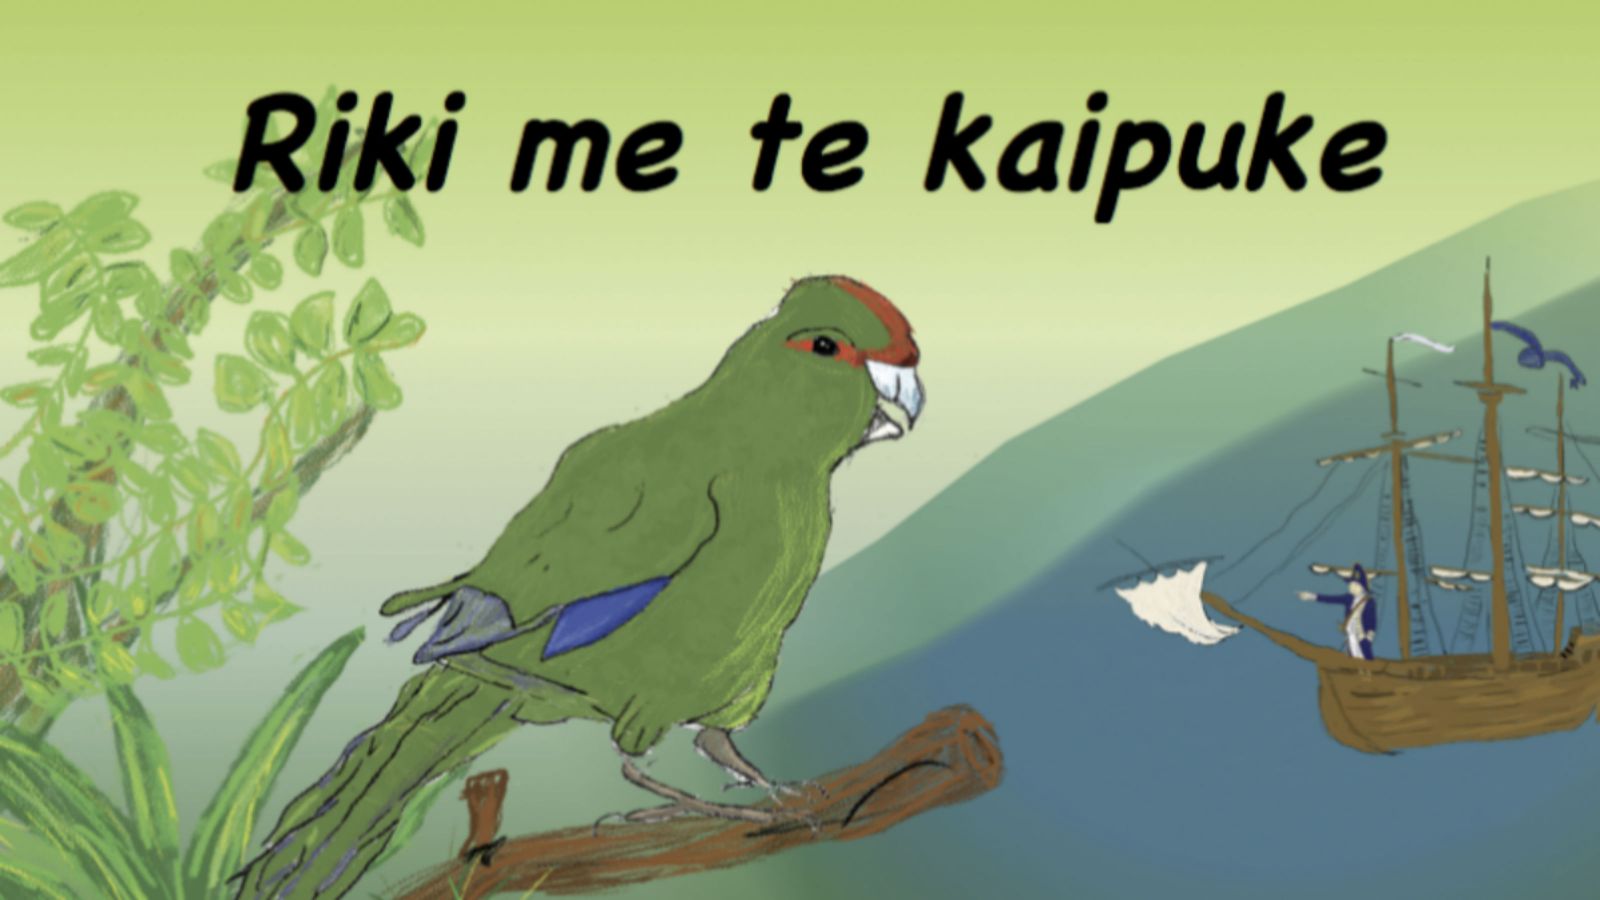 An animated picture of a green bird perched in a tree with a ship in the background – text on the image reads, Riki Me Te Kaipuke.